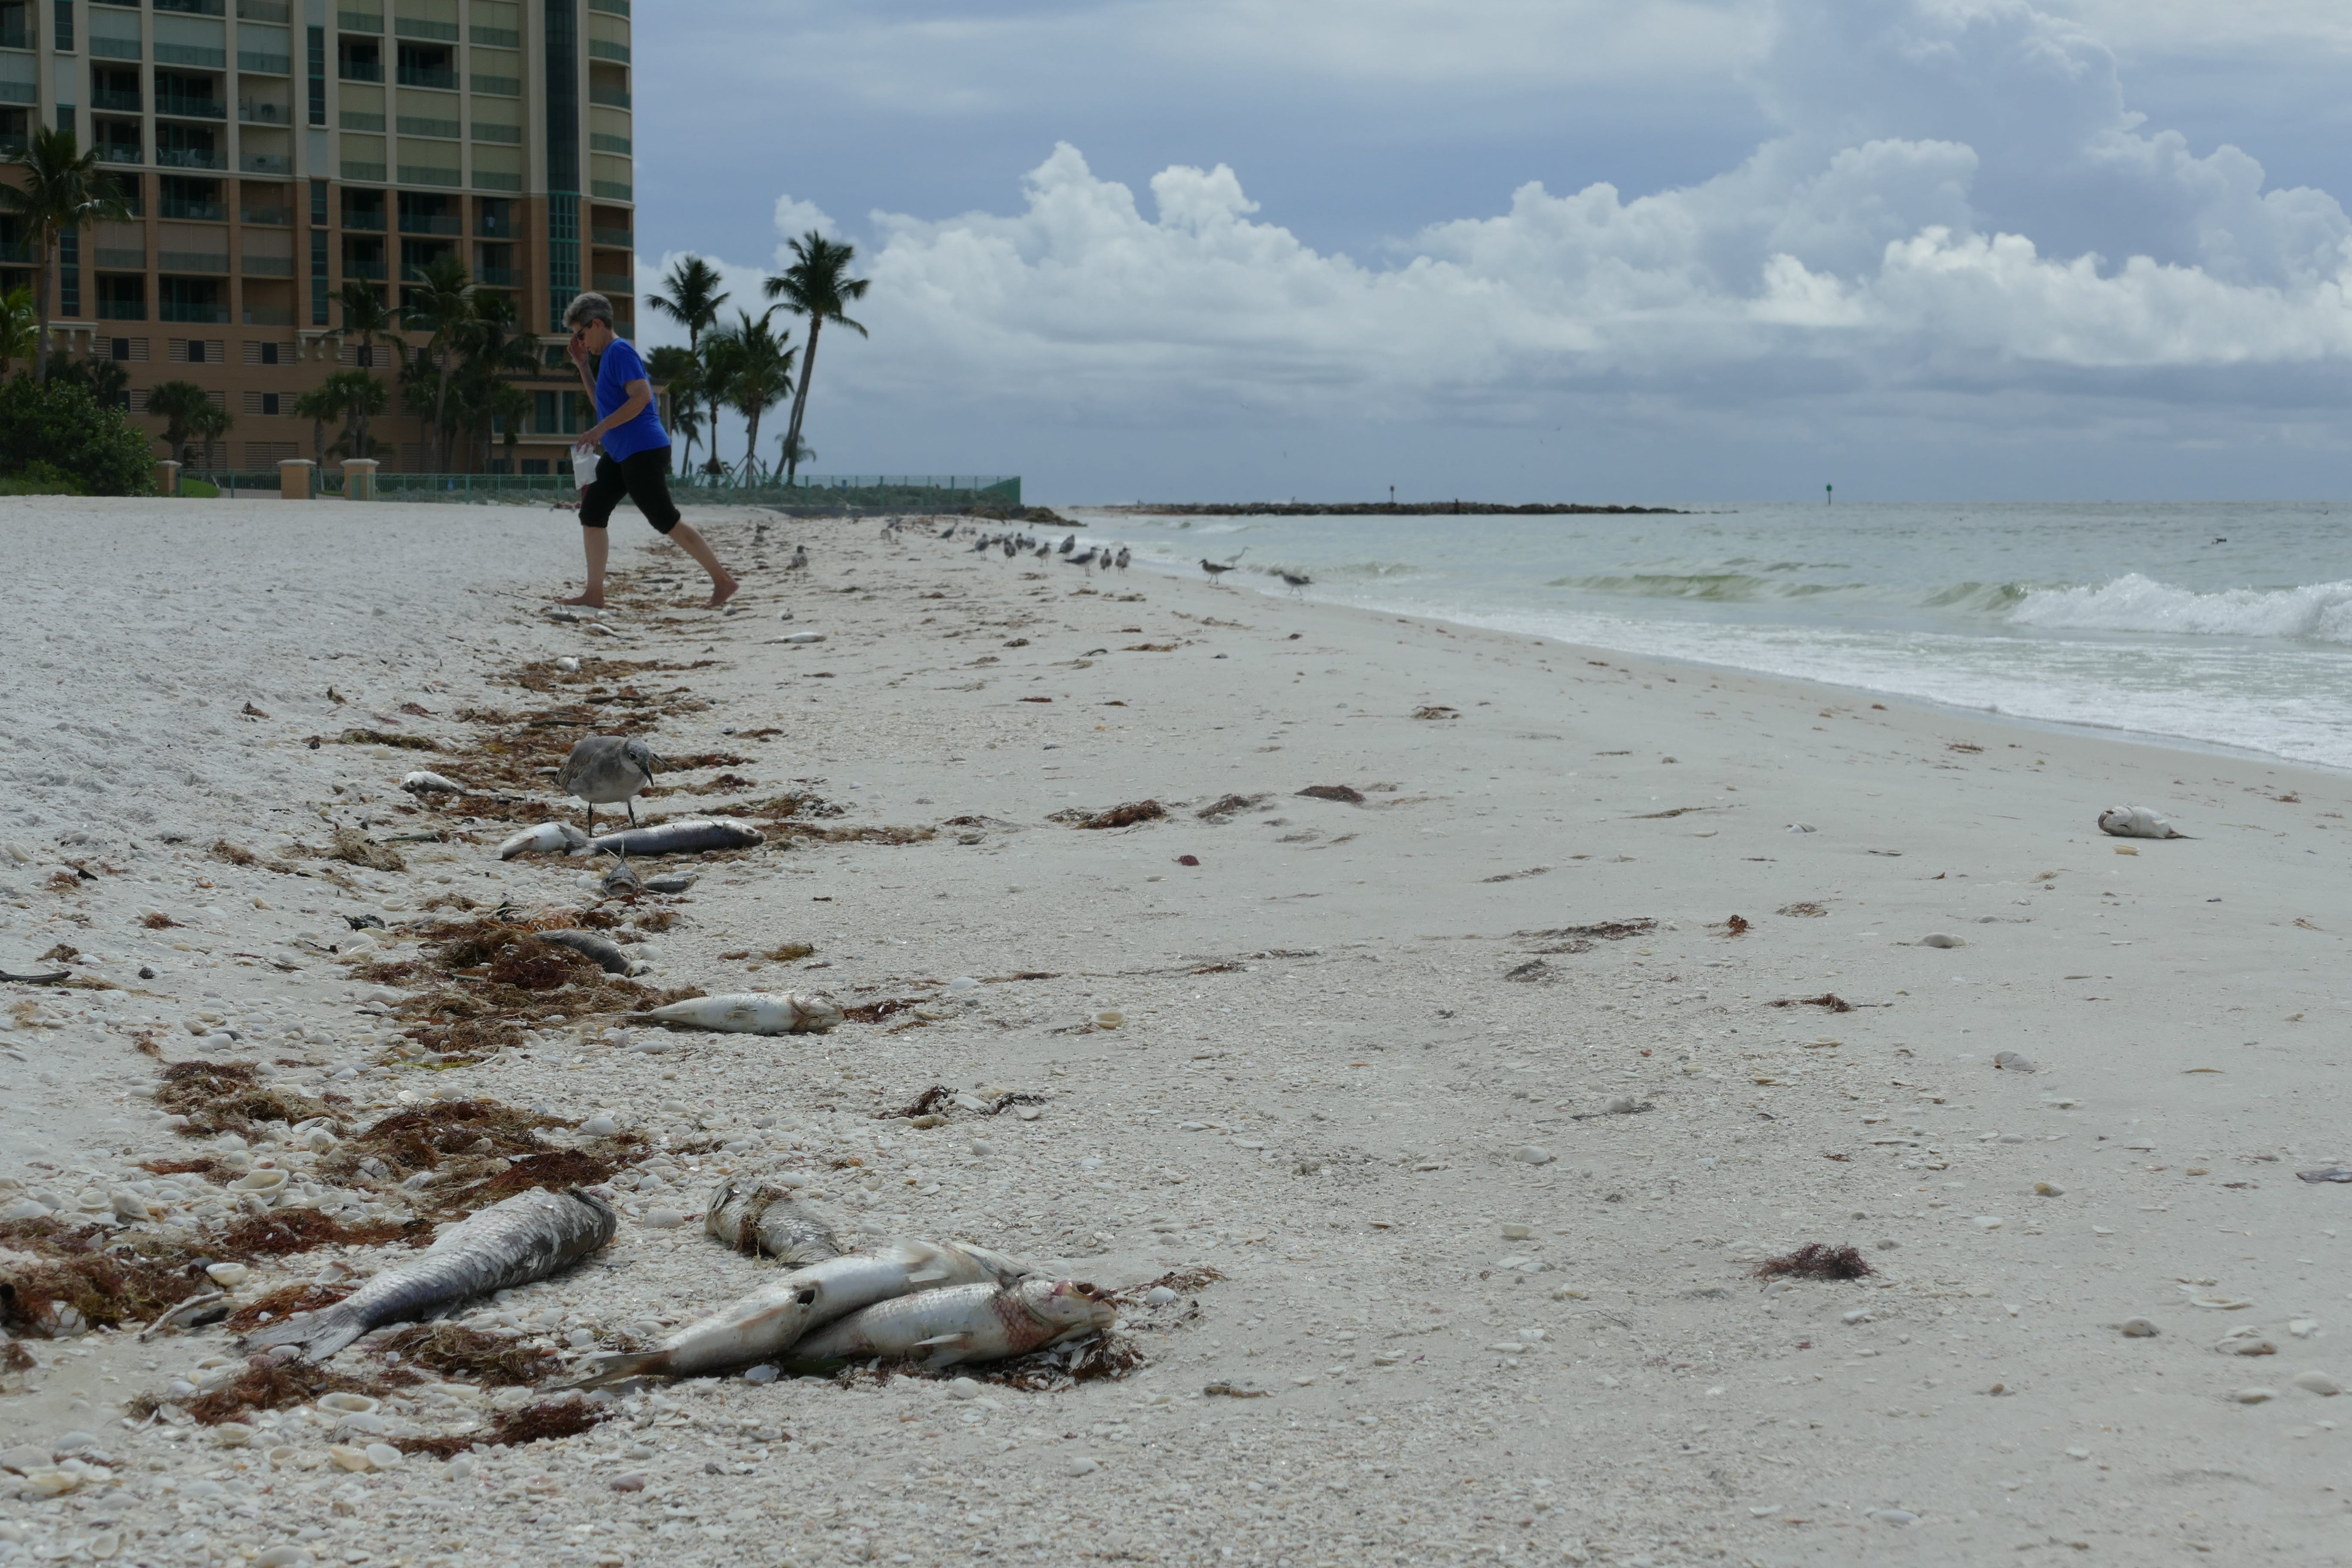 Dozens of dead fish washed ashore Oct. 9 on Marco Island as government agencies alerted of high levels of the organism that causes the red tide. Everglades.